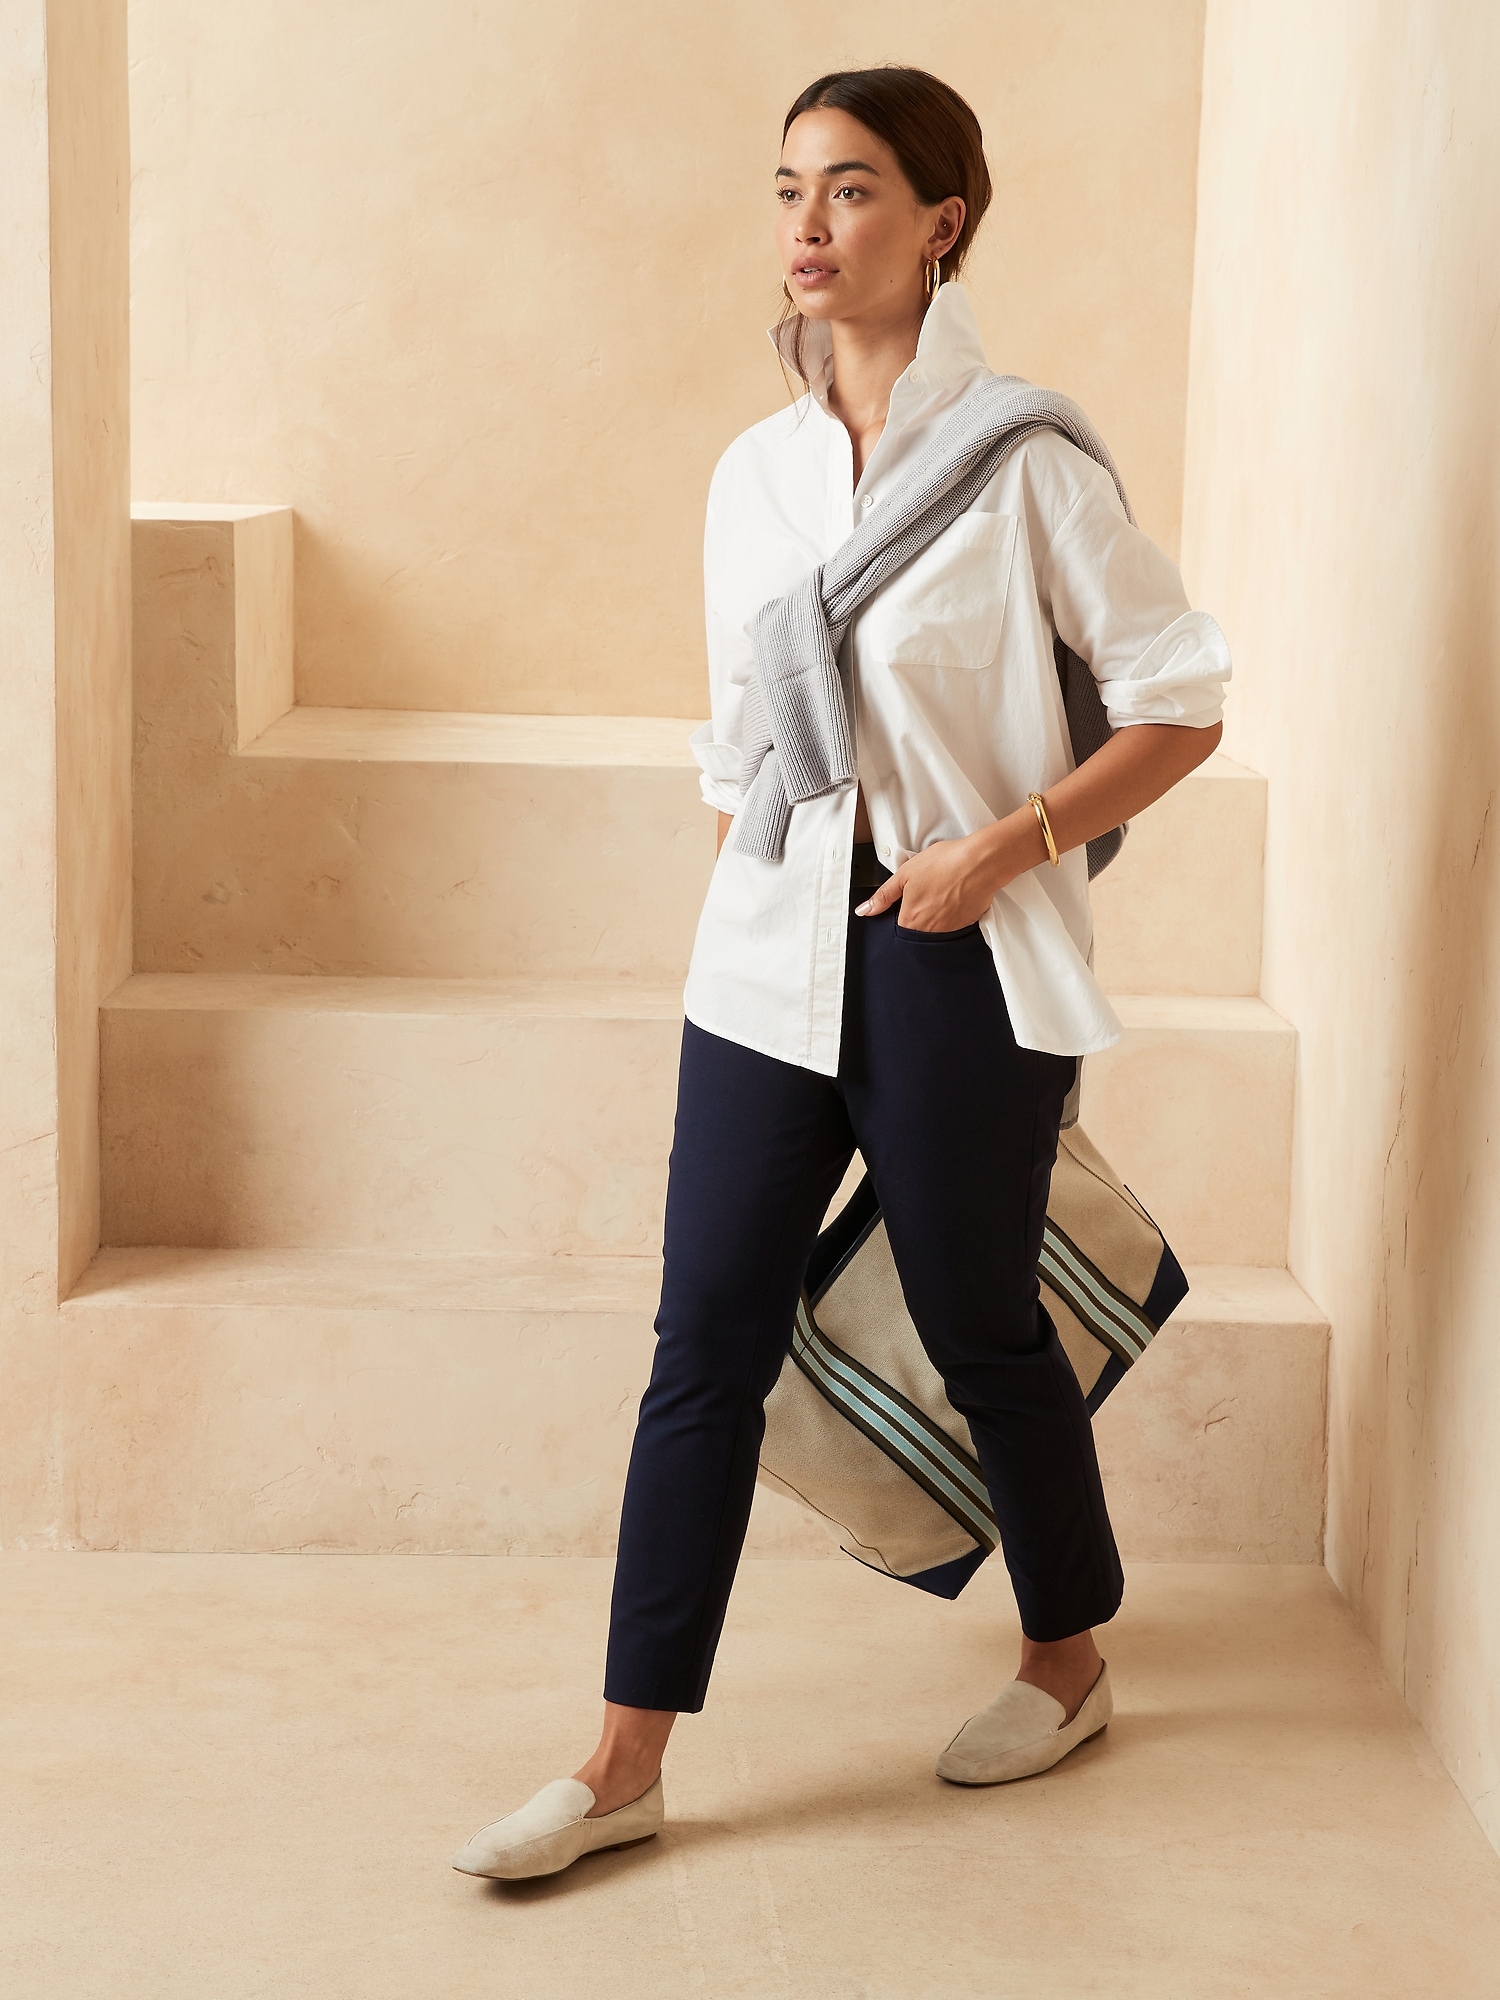 The Most Comfortable Pants For Women From Banana Republic | POPSUGAR Fashion